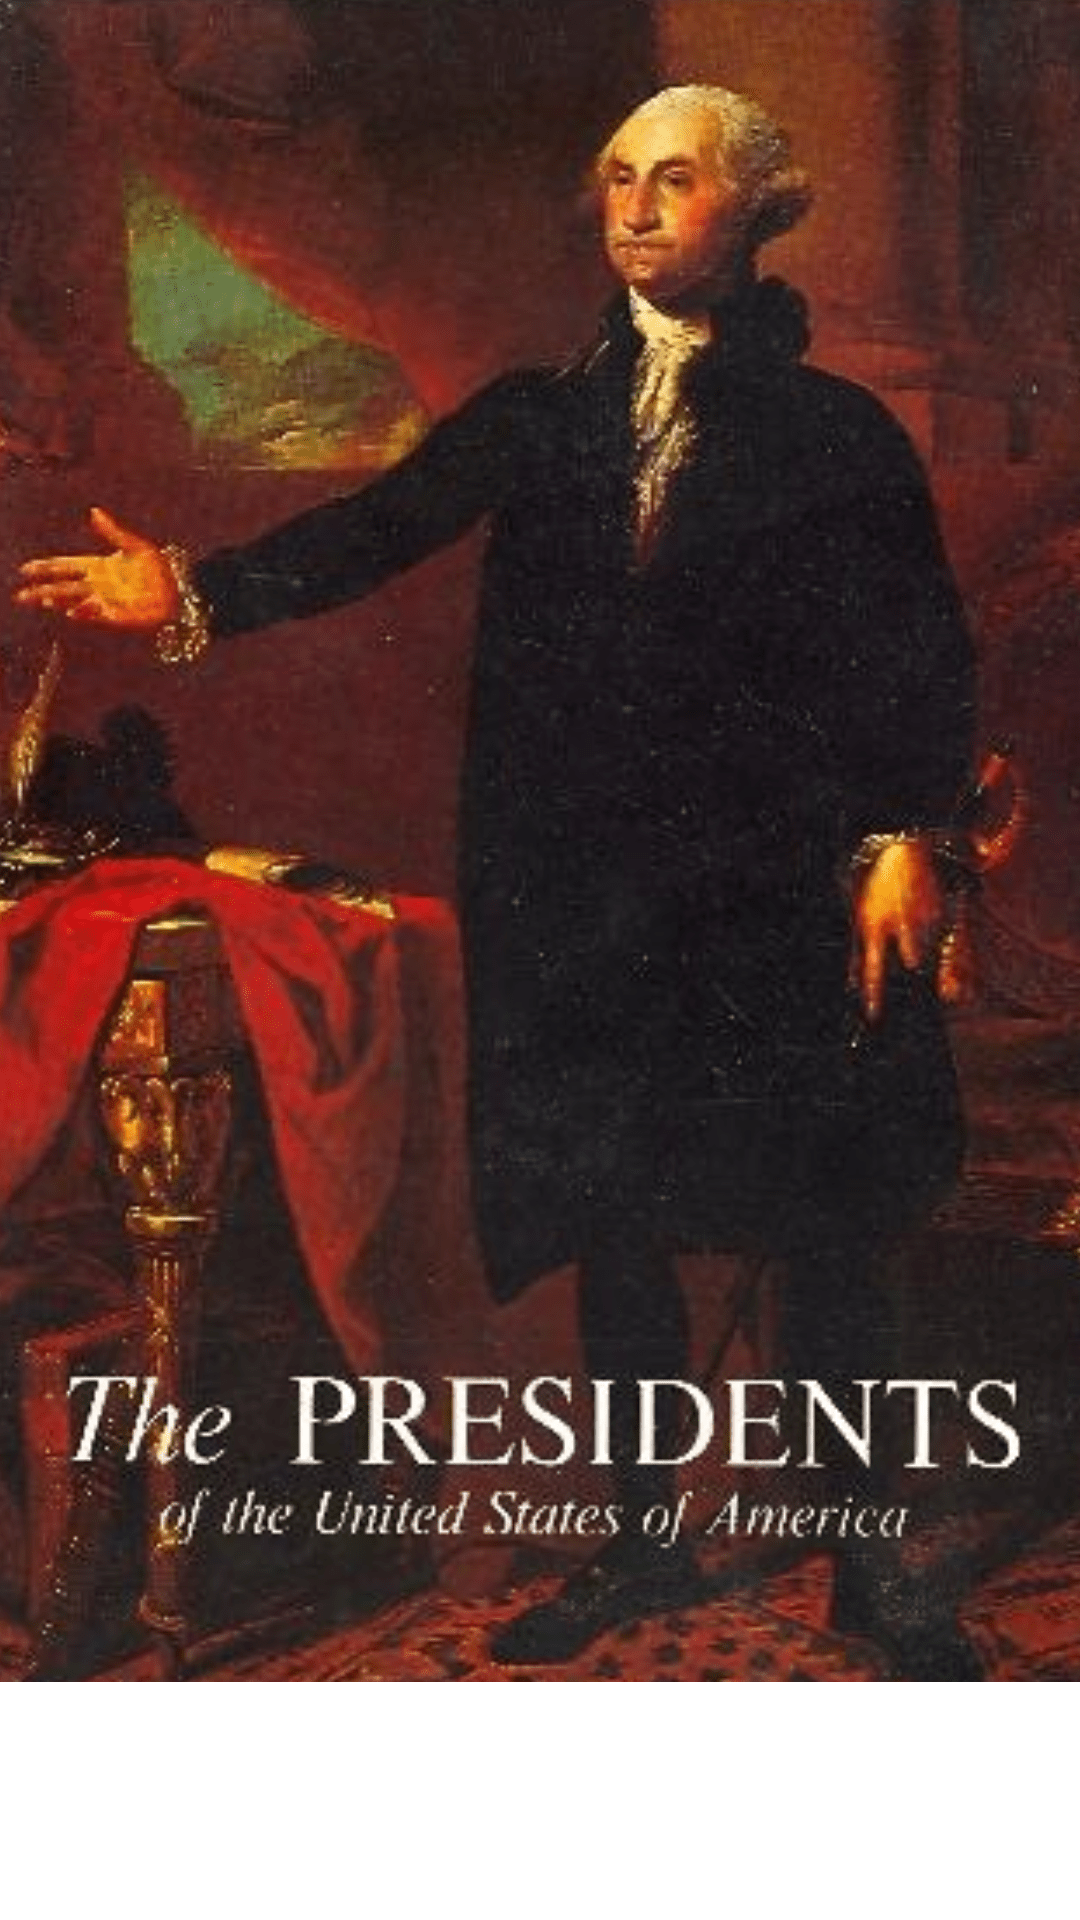 Presidents of the United States of America by Frank Freidel